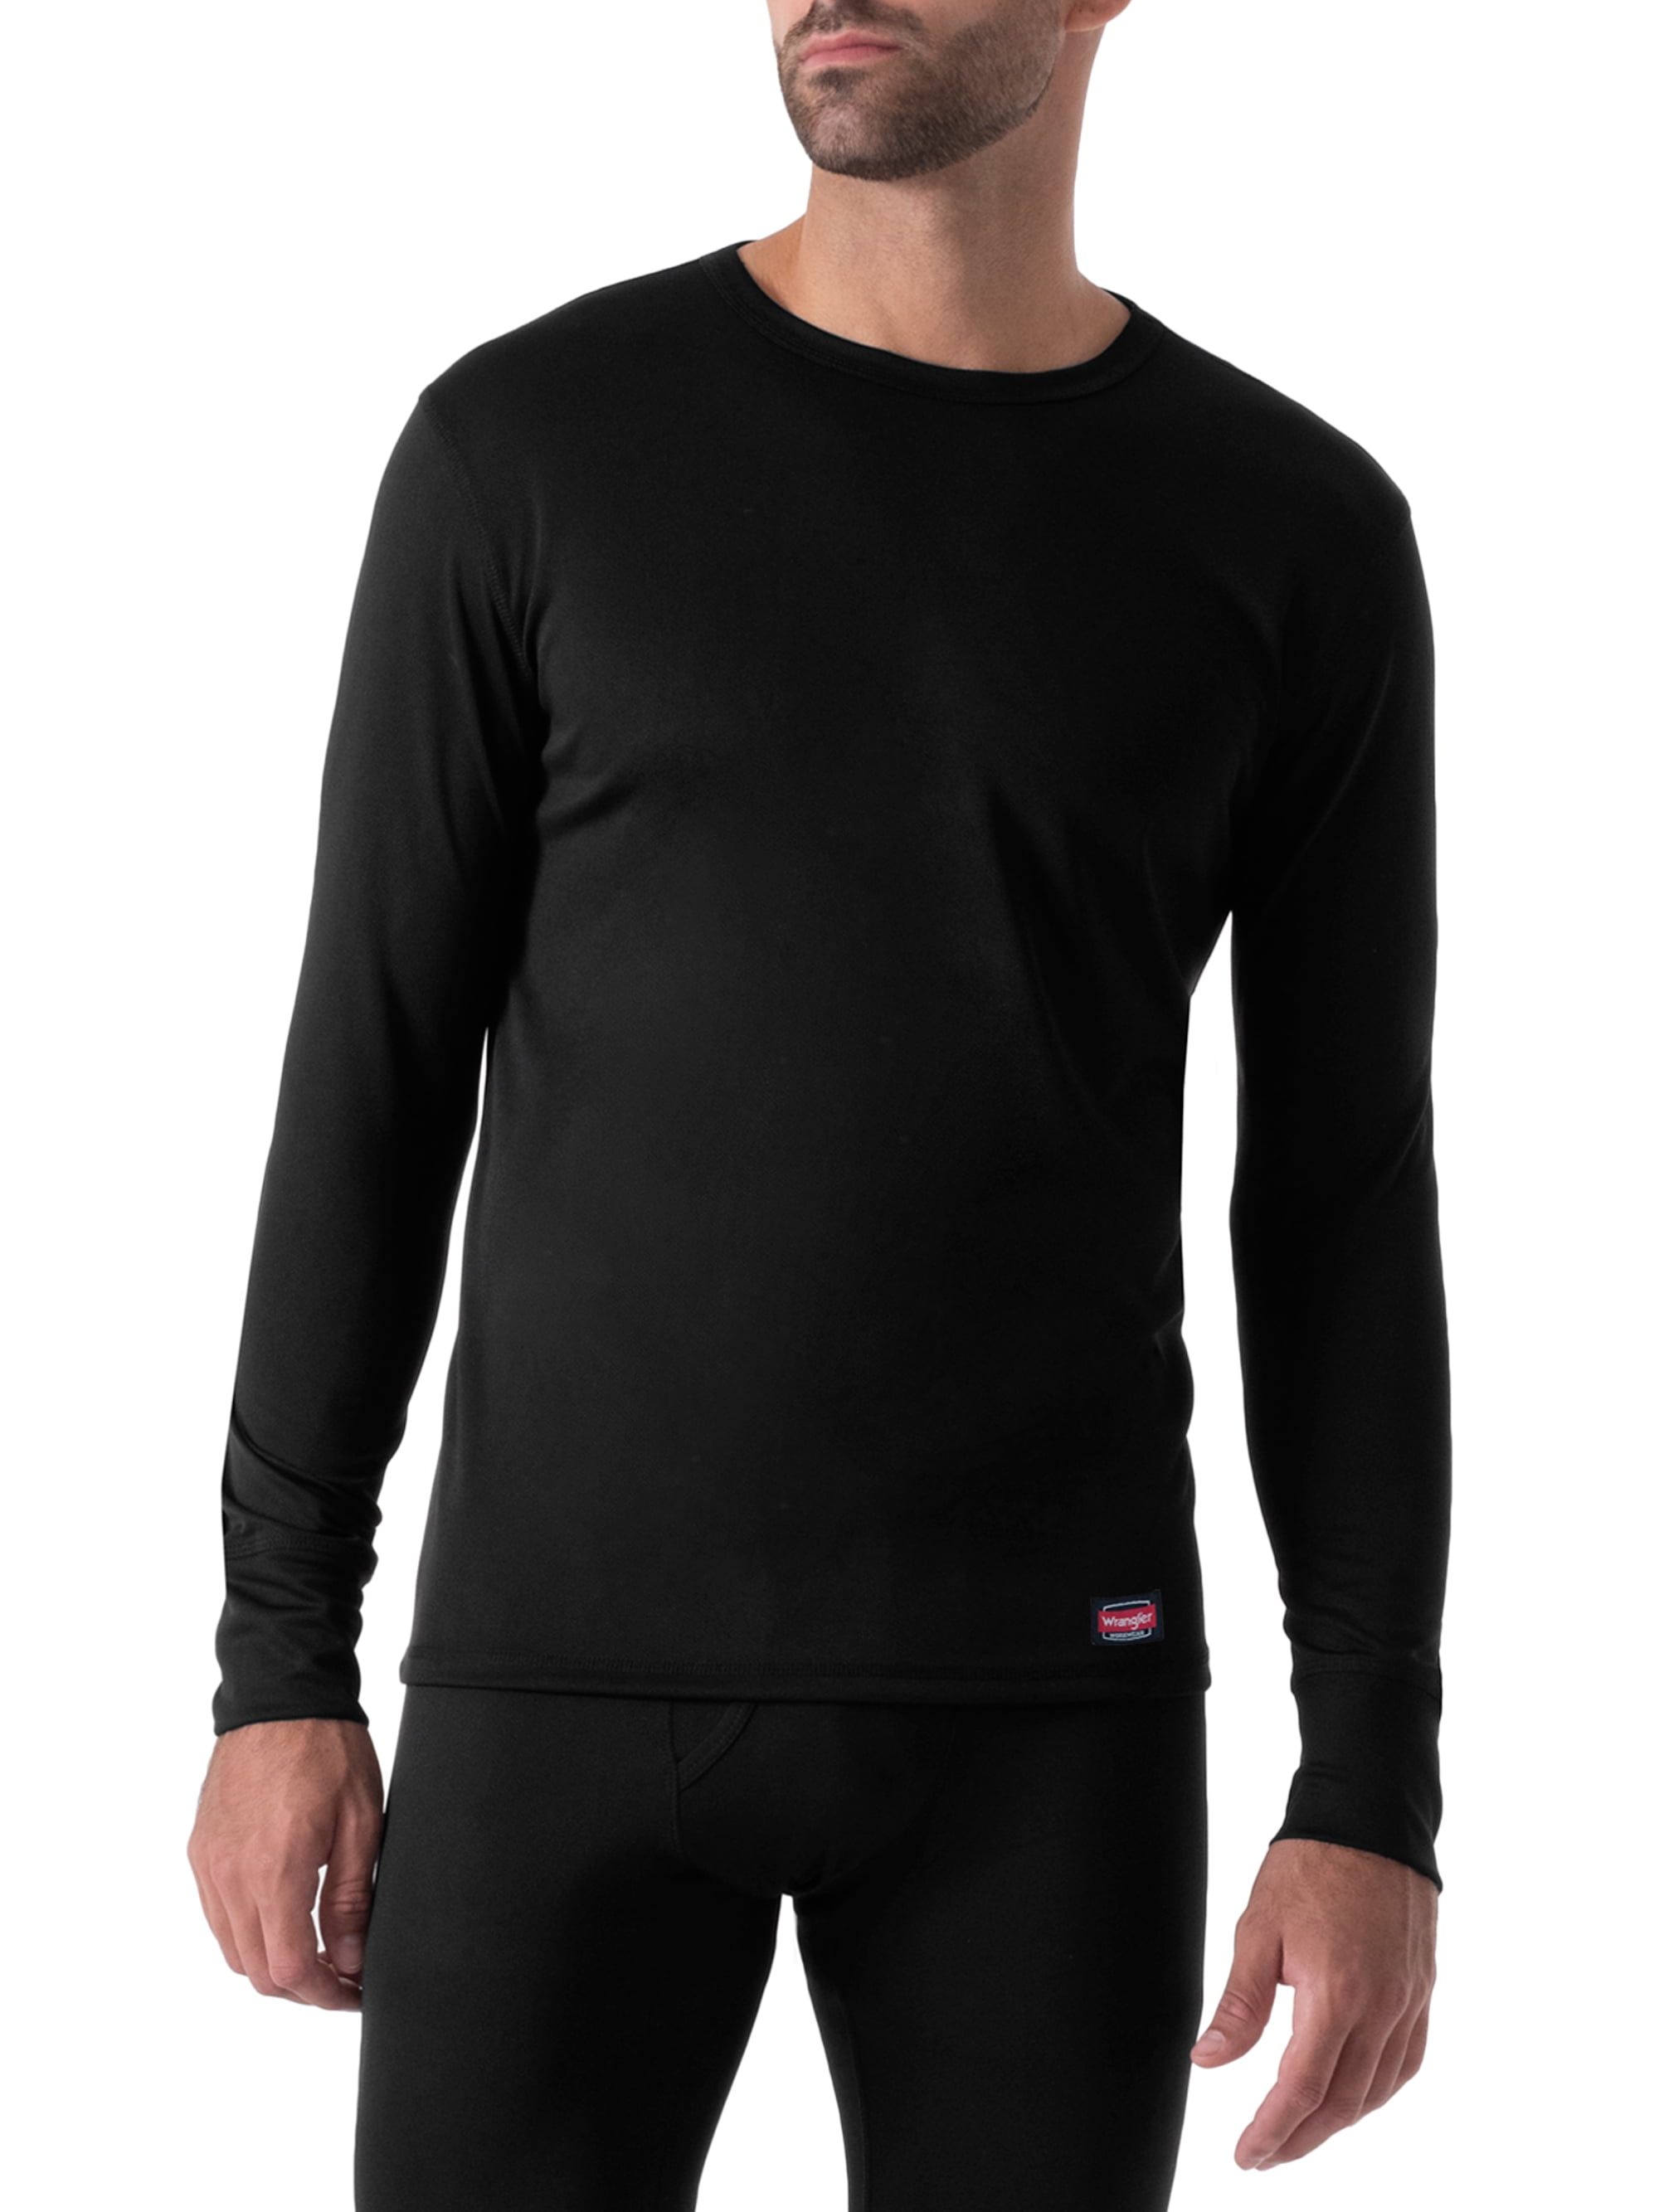 Details about    ONE NEW REEBOK MENS PERFORMANCE BASE LAYER THERMAL TOP BOTTOM BLACK /GREY 